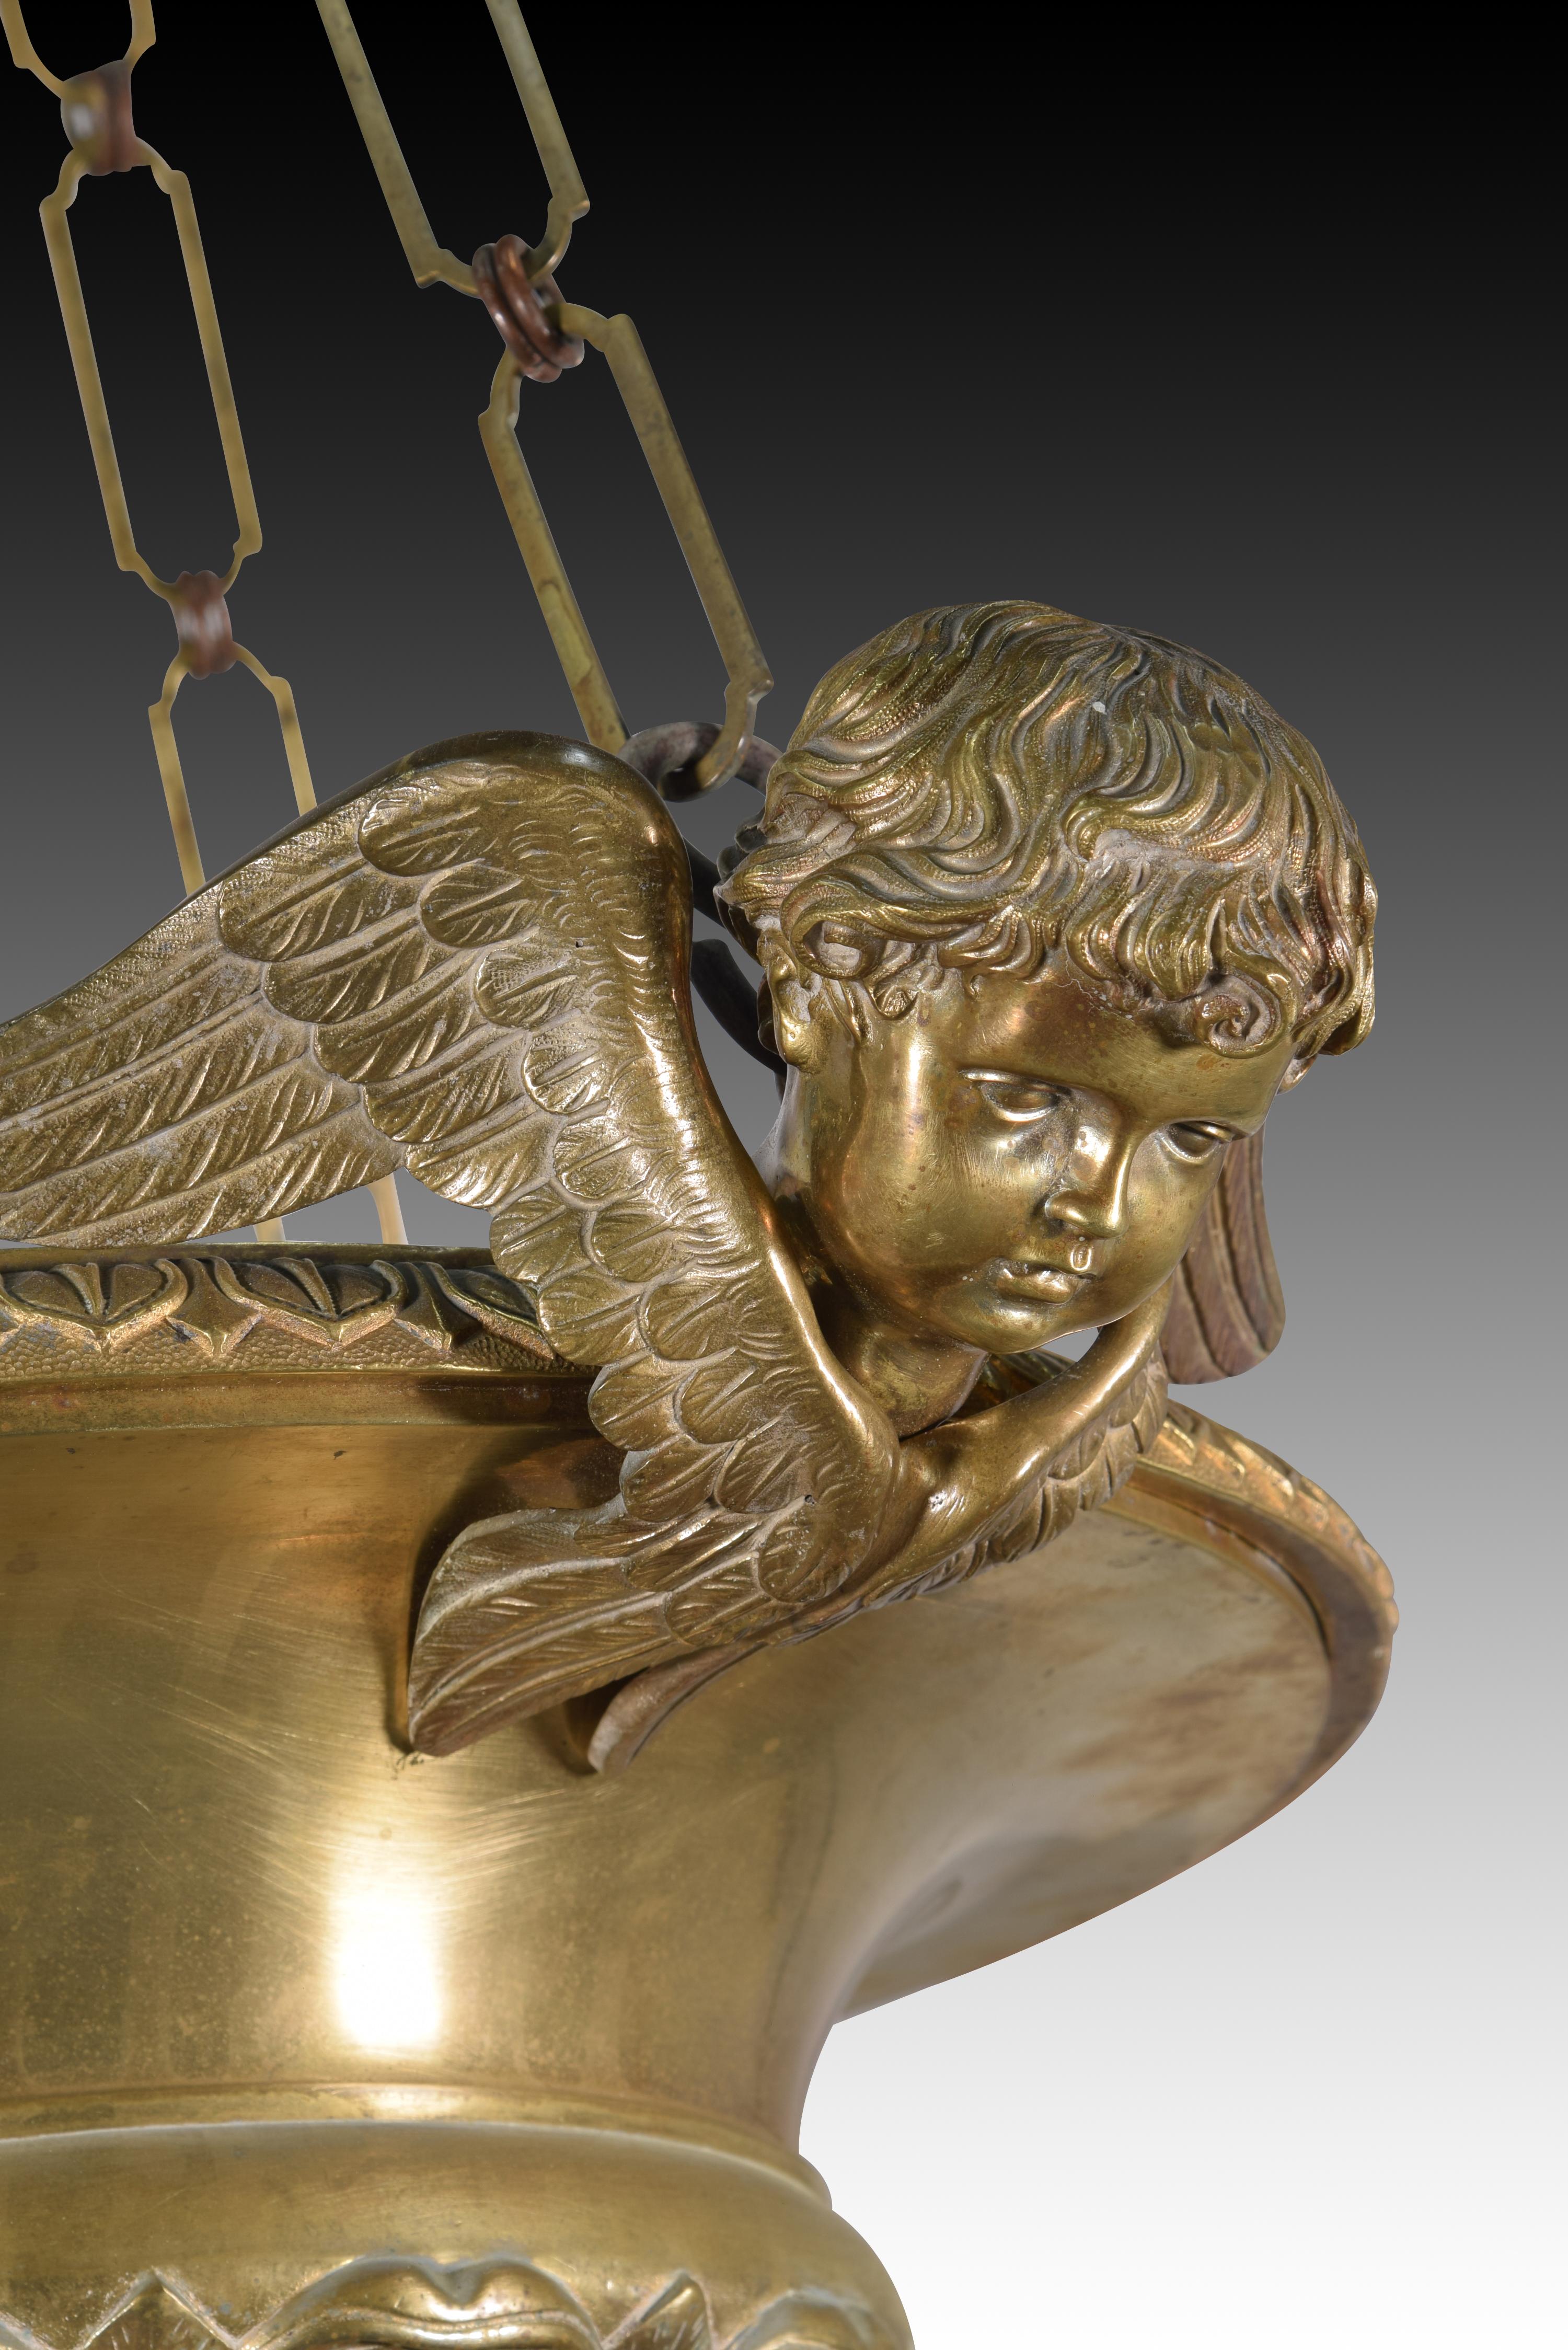 Lamp. Bronze. XIX century. Lamp with circular glass
decorated with a series of classicist decoration moldings
at the bottom and an oval shape from which a
ring hangs, and another molding at the top joining
three heads of winged angels From the back